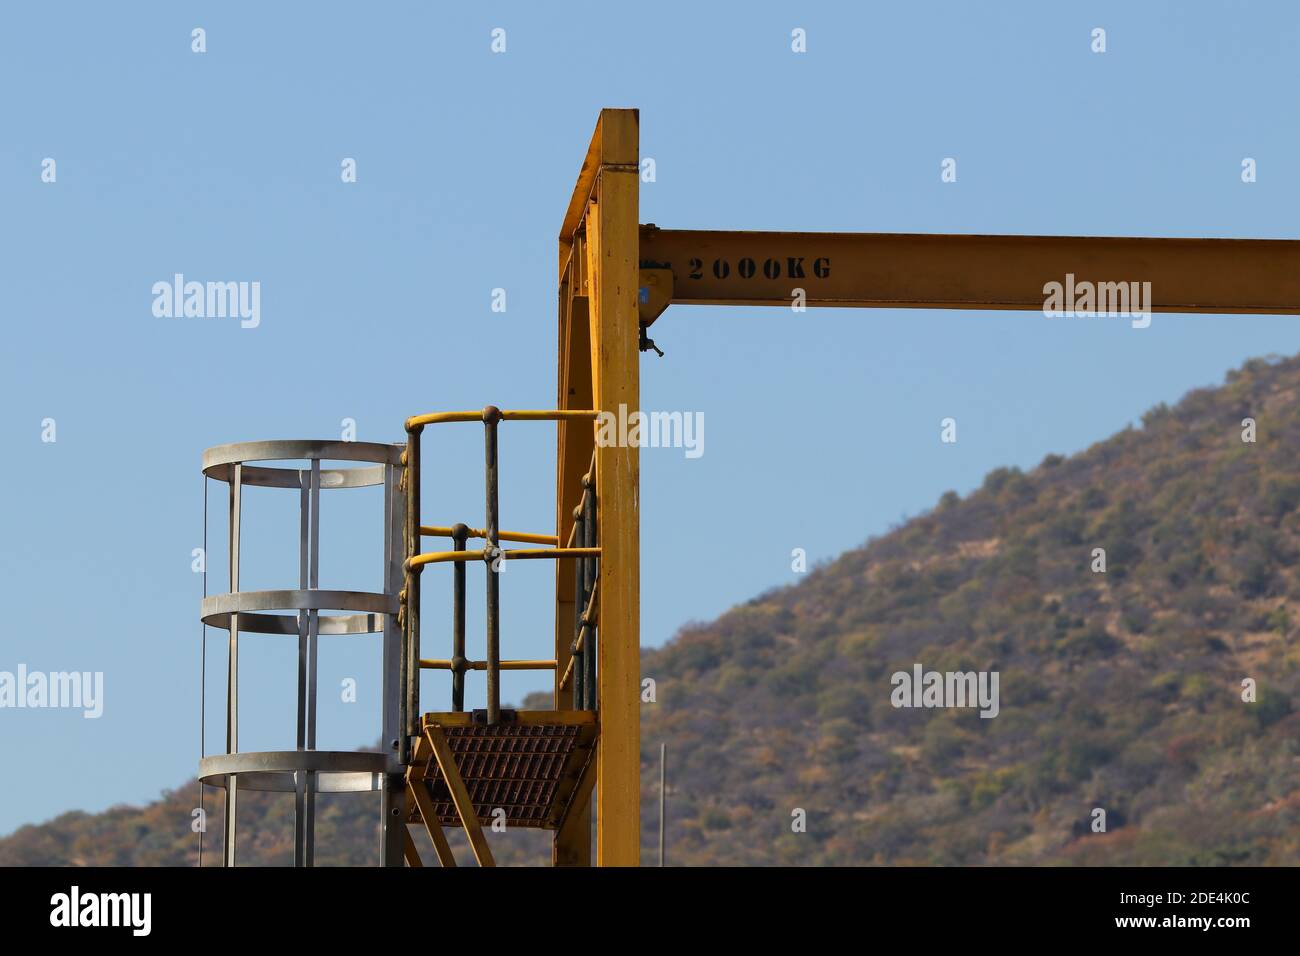 Industrial Loading Hoist Structure With Platform Stock Photo